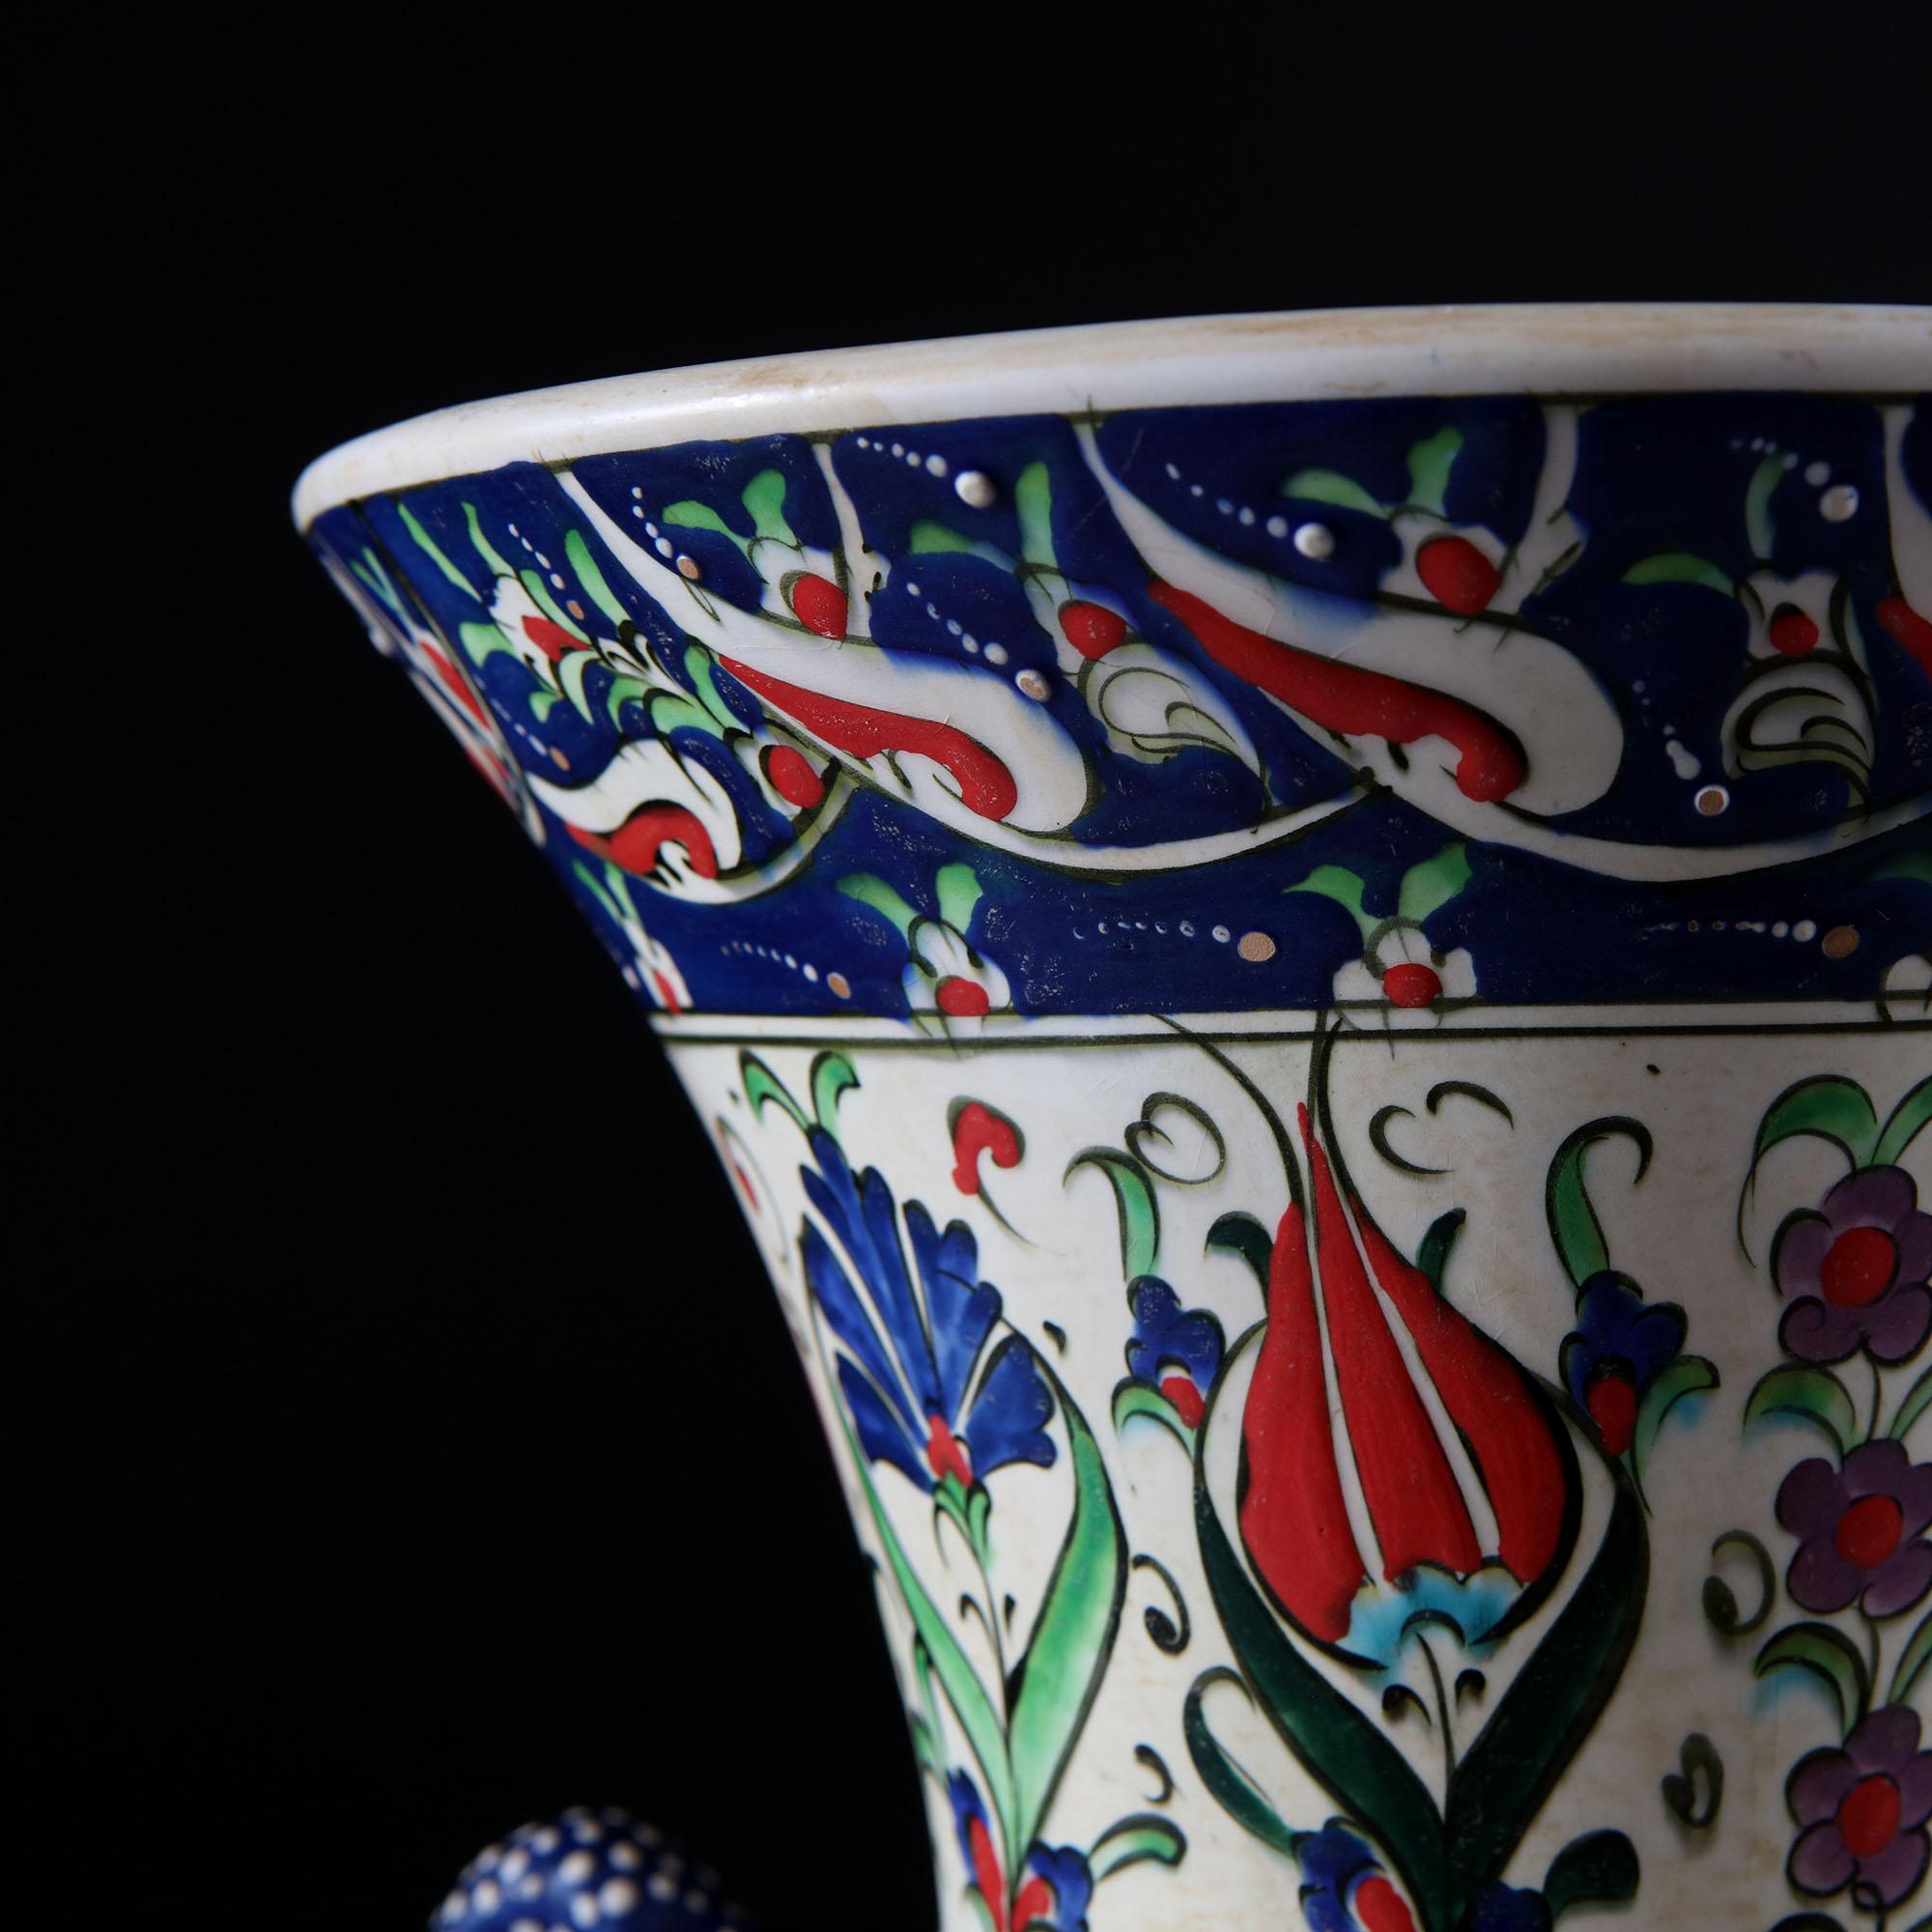 Ceramic Early 20th Century Polychrome Turkish Islamic Mosque Lamp in the Iznik Style